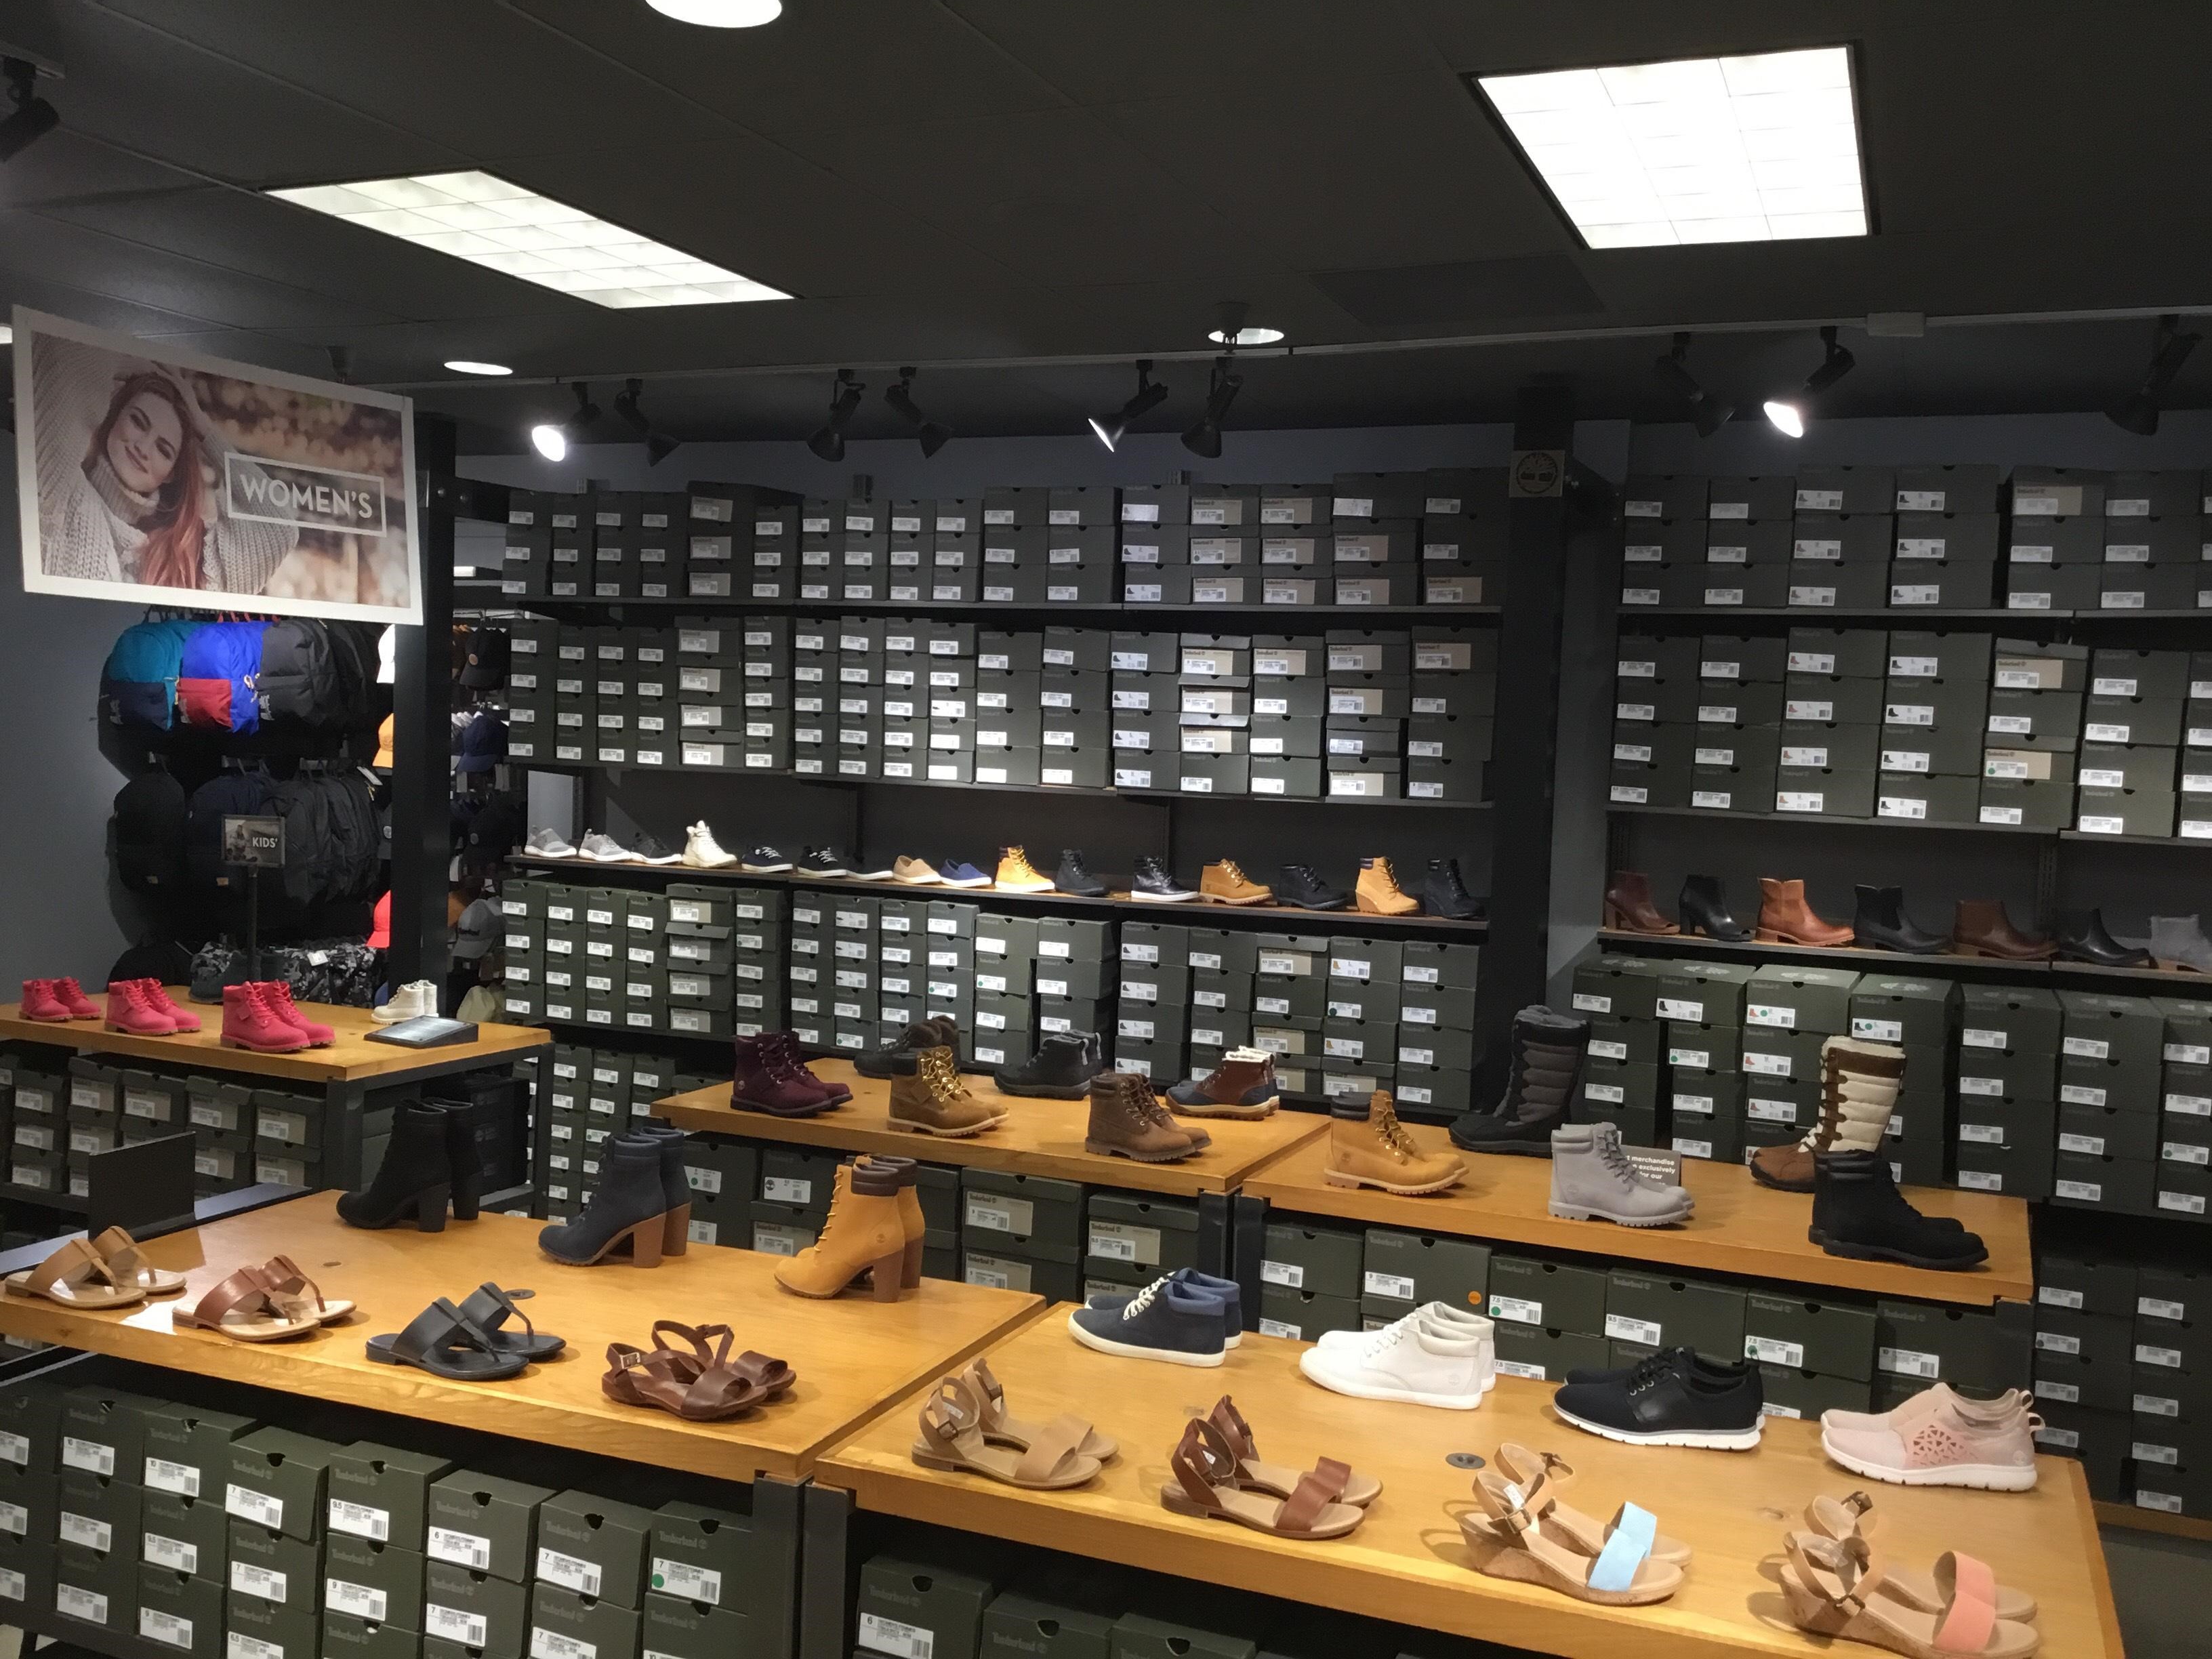 Timberland - Boots, Shoes, Clothing & Accessories in Vacaville, CA